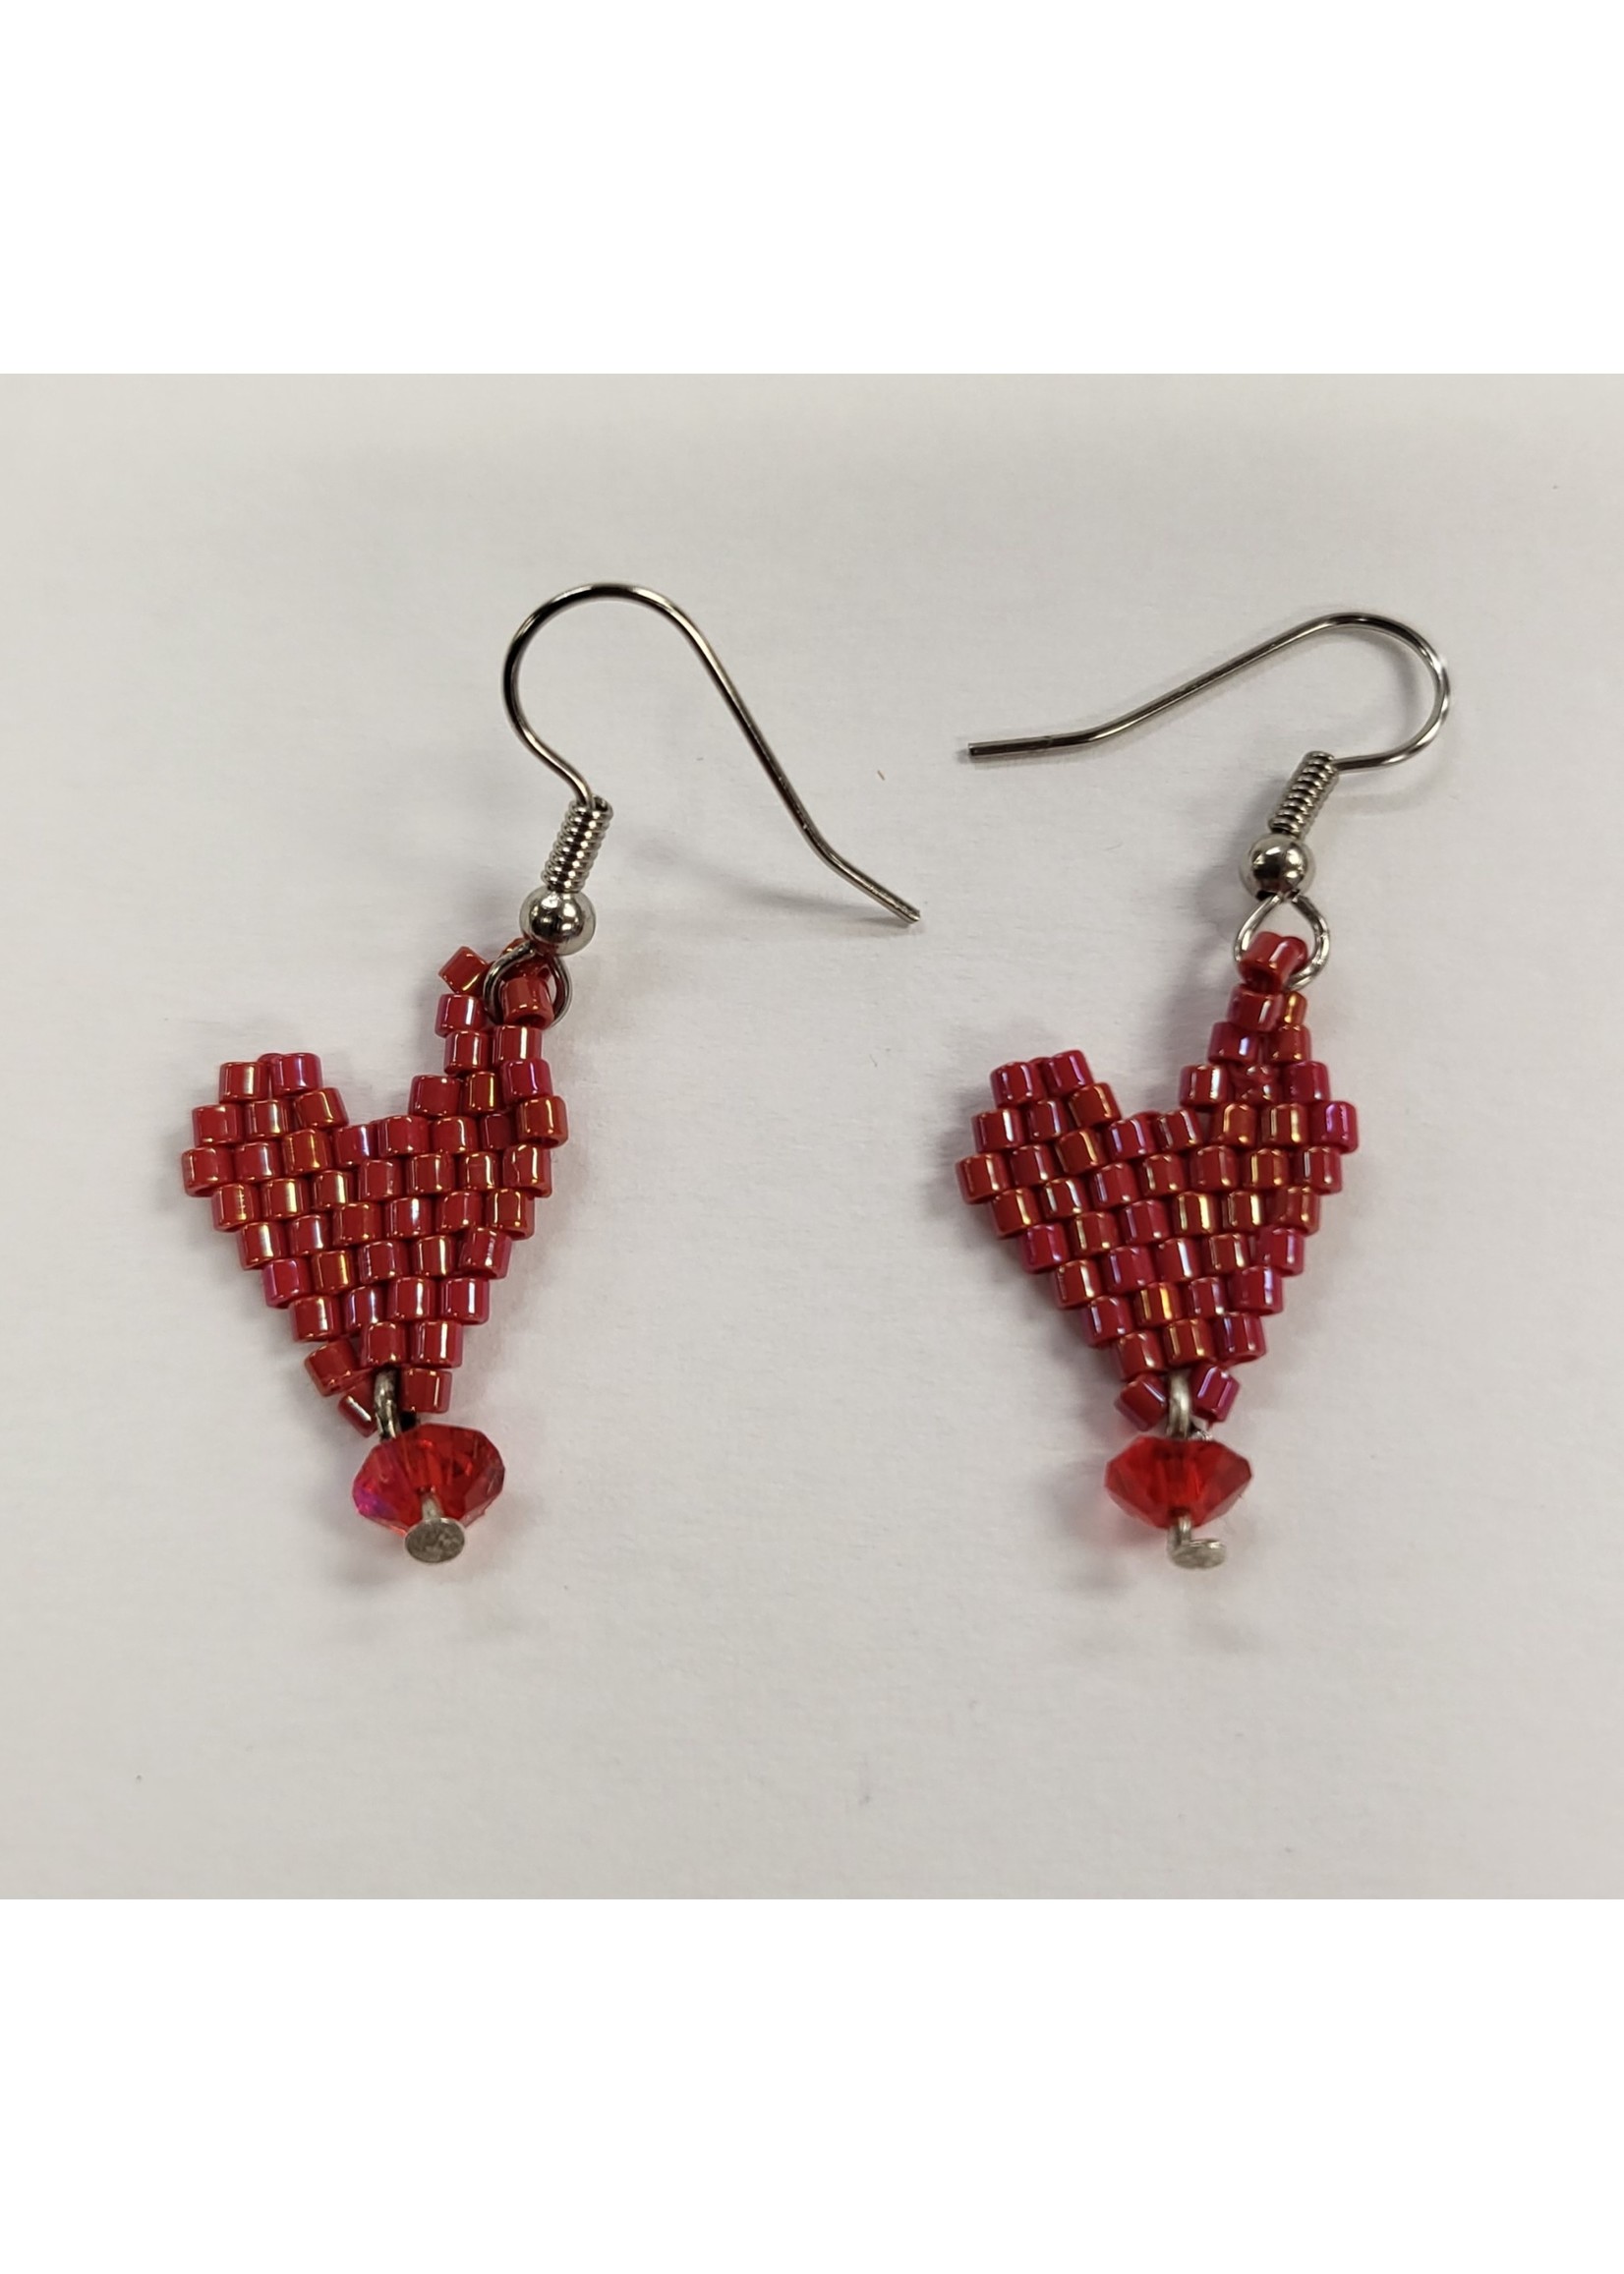 Beaded Earrings Red Hearts (SOLD)